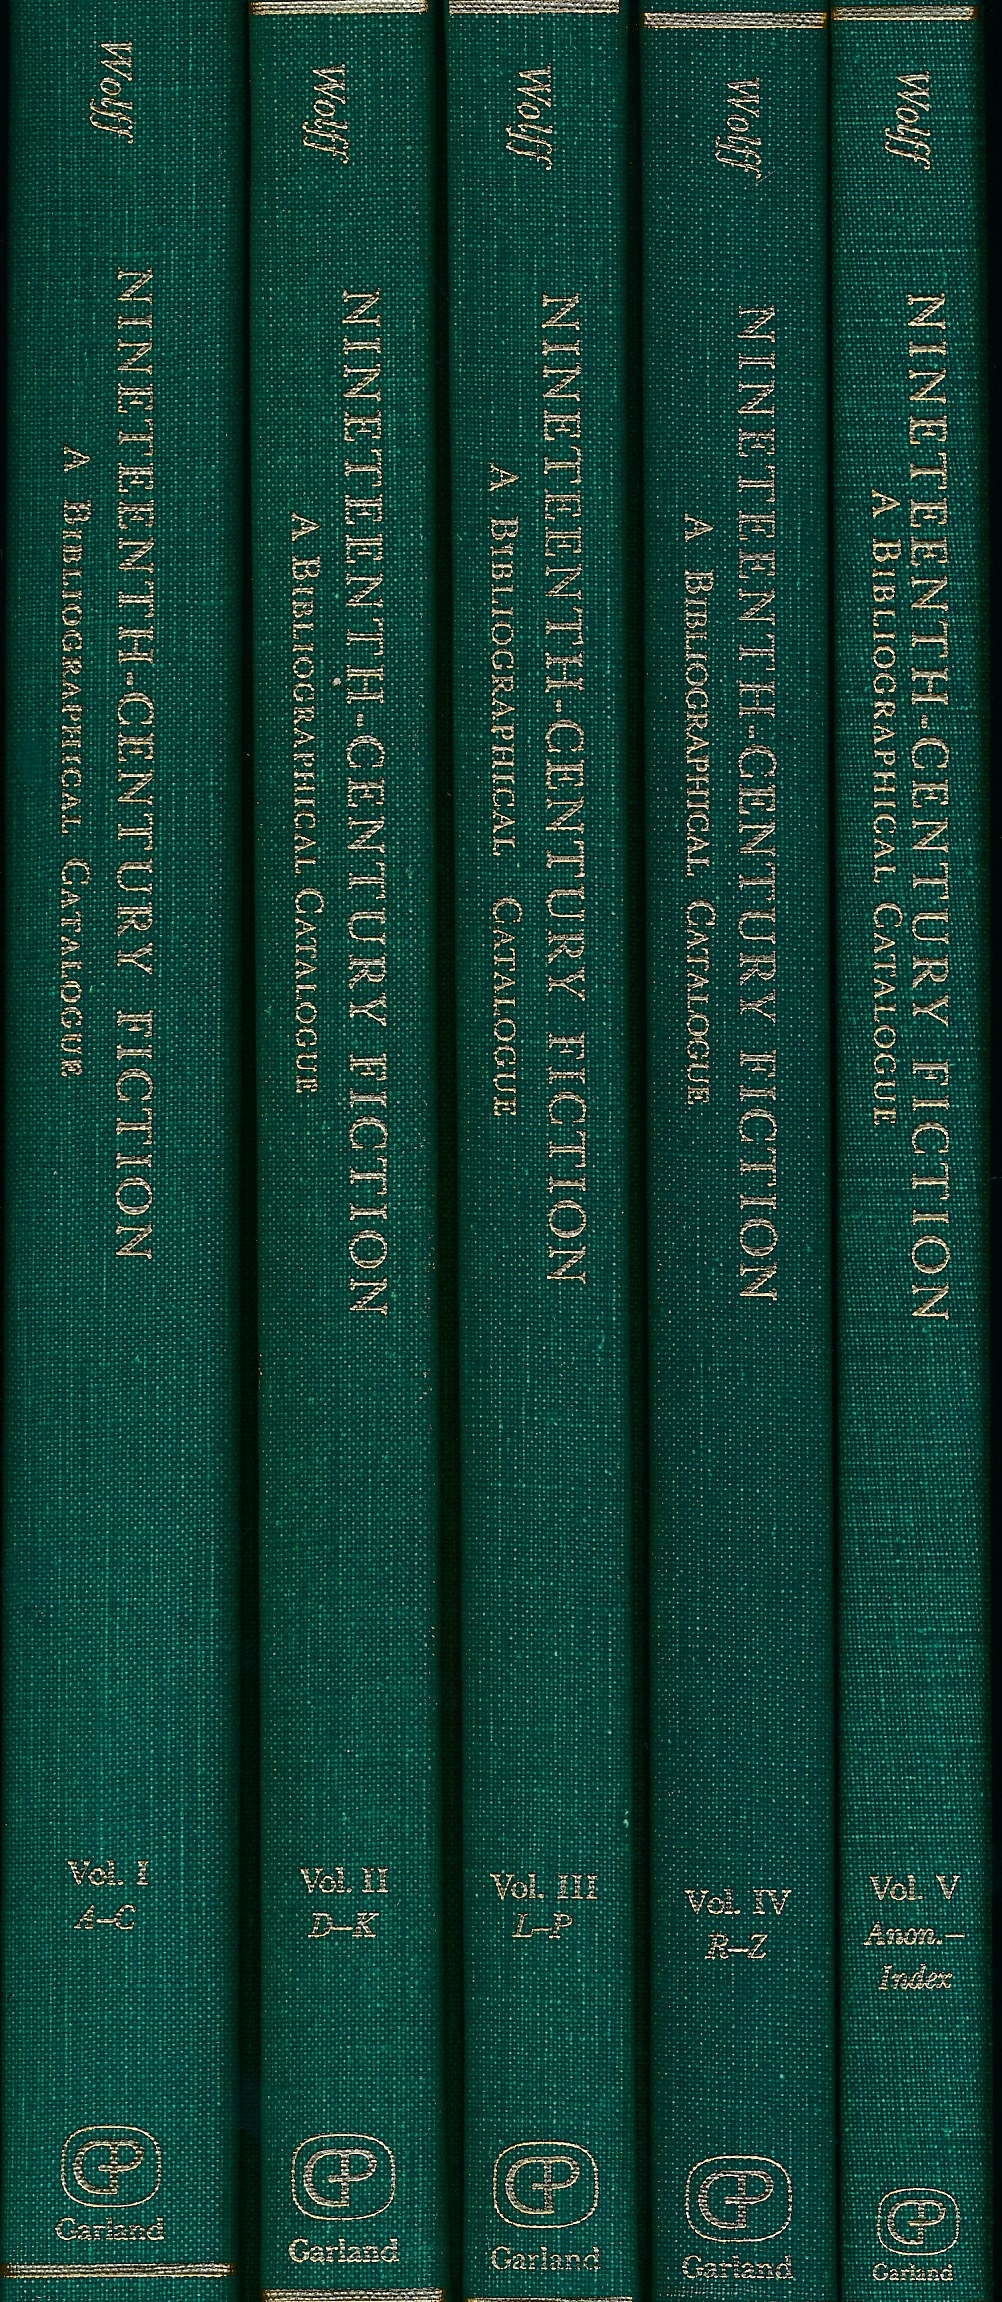 Nineteenth-Century Fiction. A Bibliographical Catalogue Based on the Collection Formed by Robert Lee Wolff. 5 volume set.